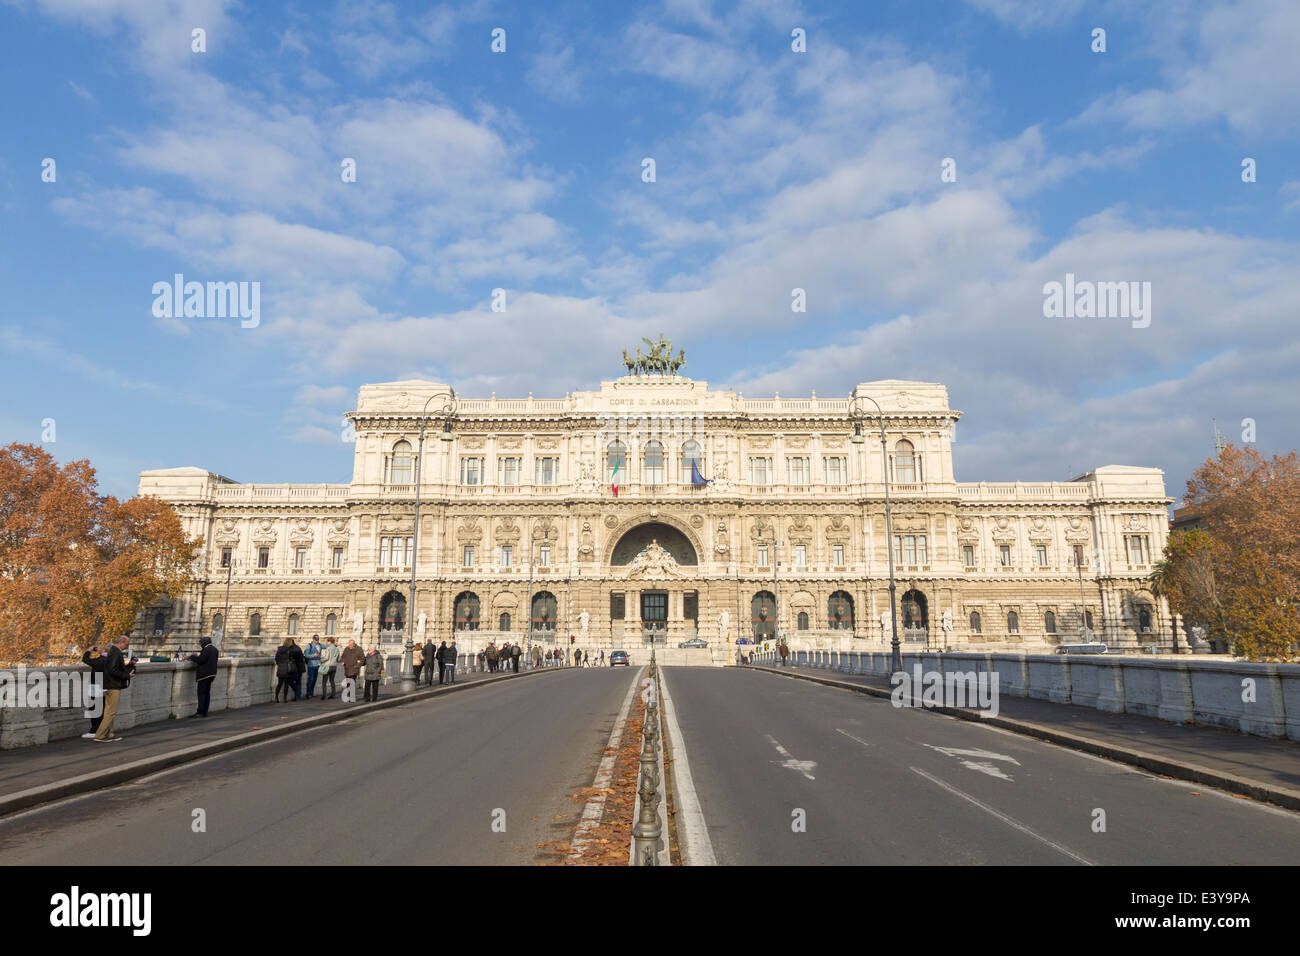 Supreme court of cassation, palace of justice, Rome, Italy Stock Photo